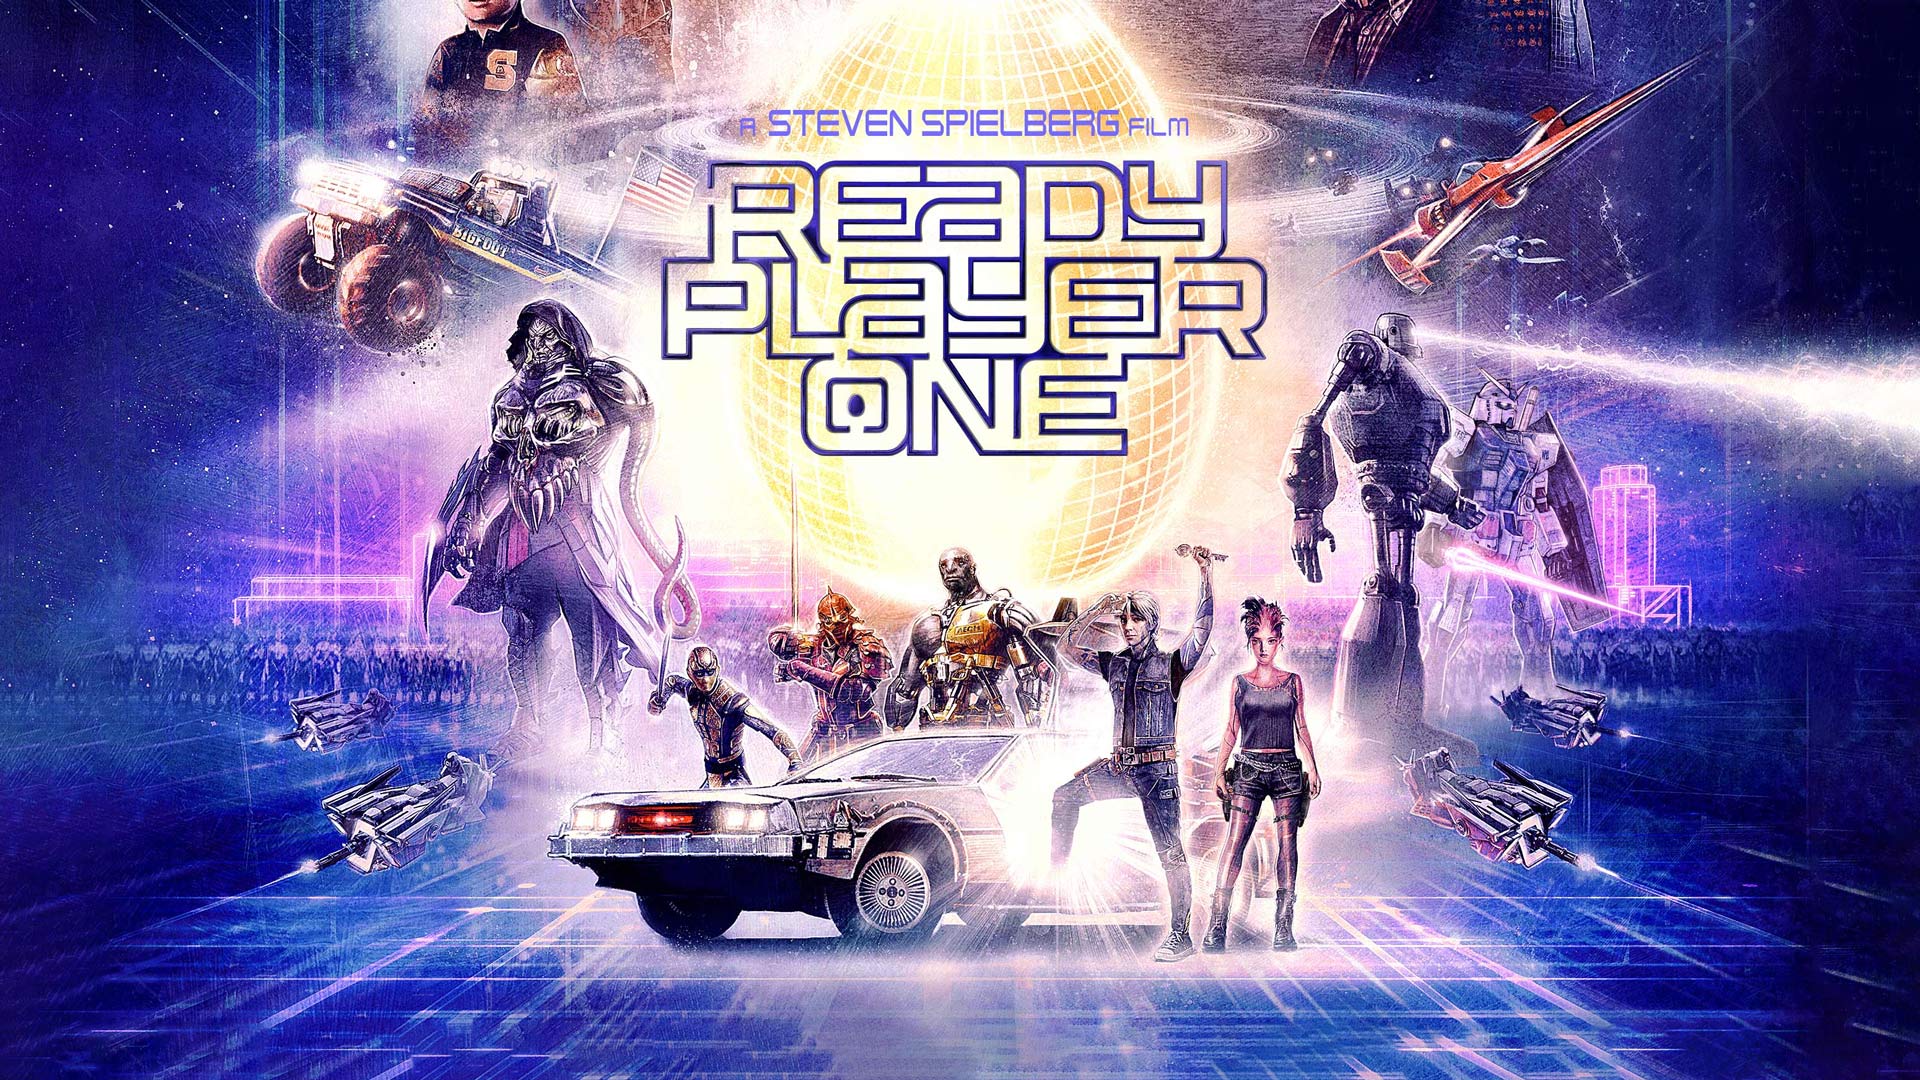 Ready Player One  Ready player one, Player one, Ready player one